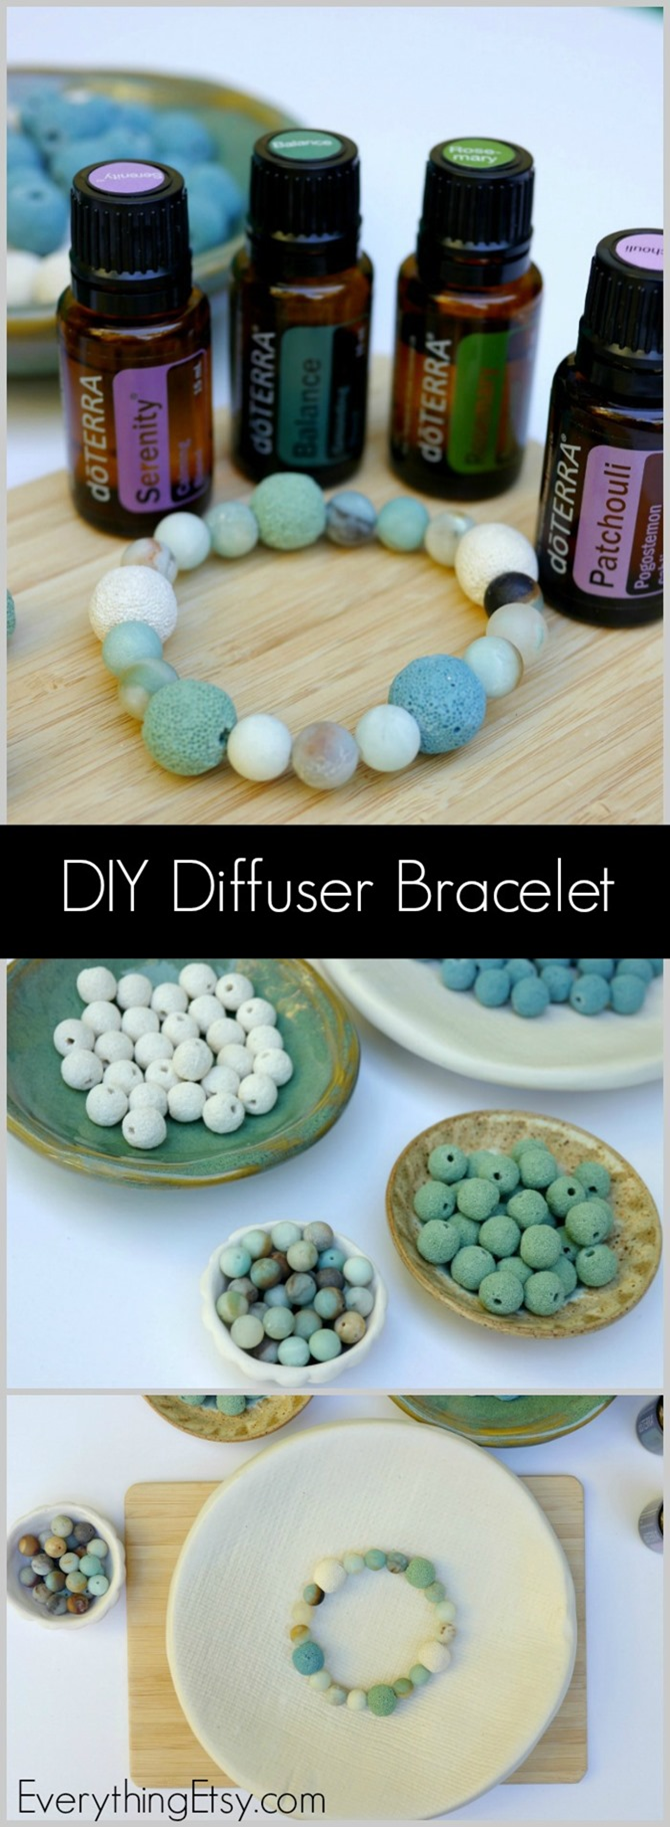 DIY Diffuser Bracelet - Tutorial and resources on EverythingEtsy